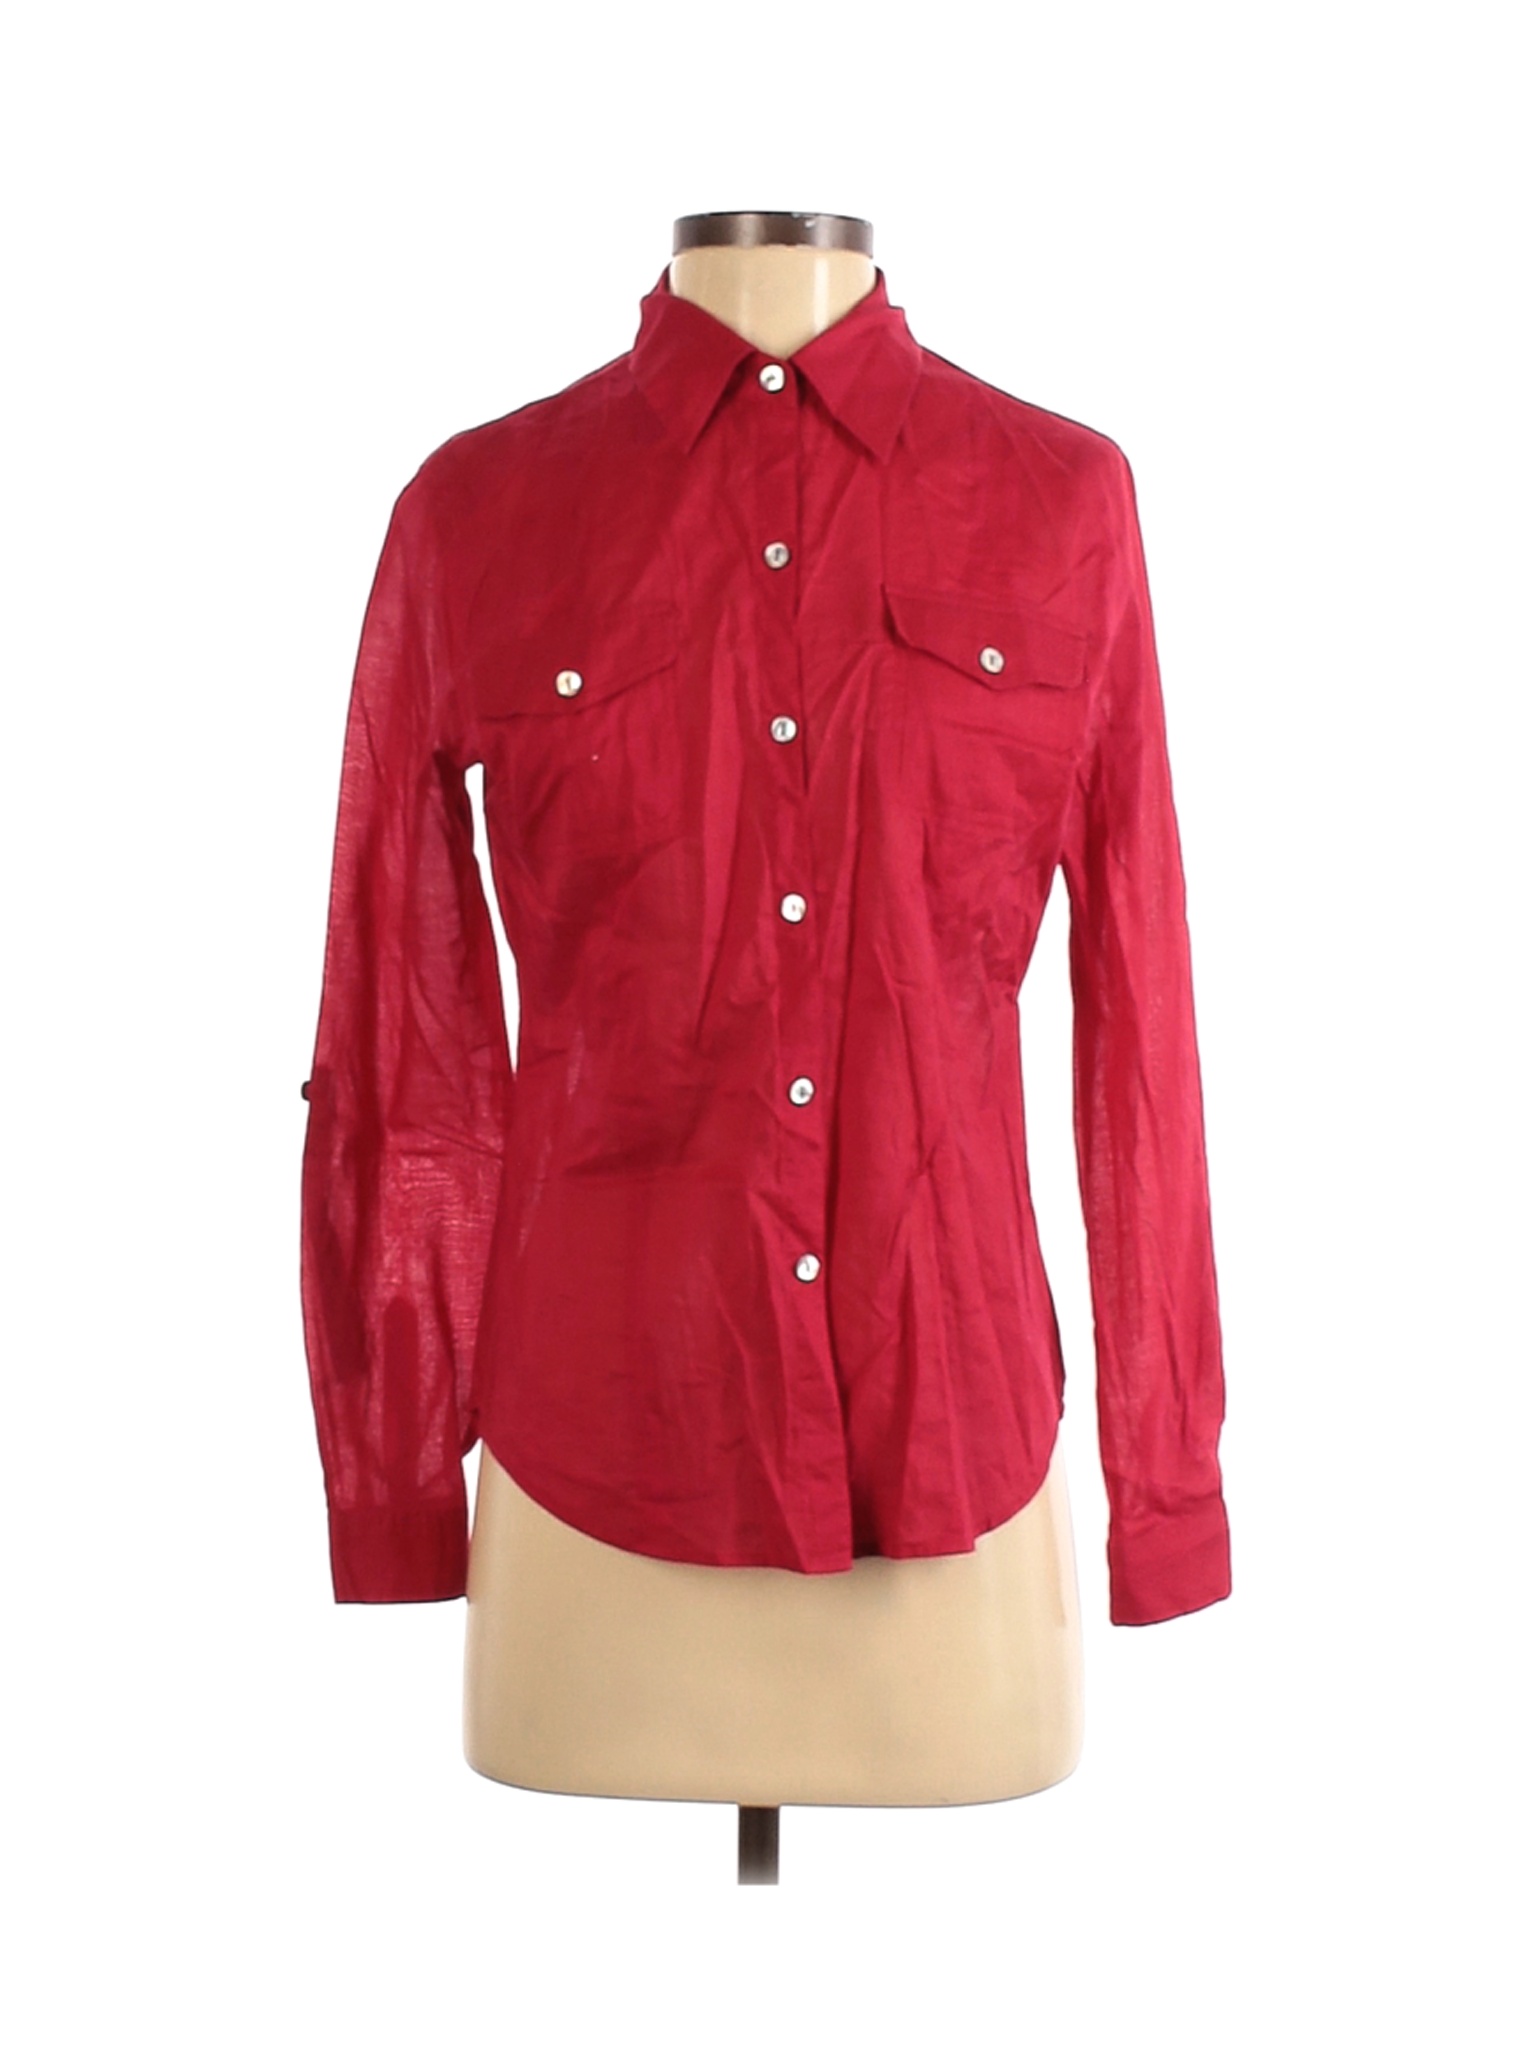 chicos red button shirt